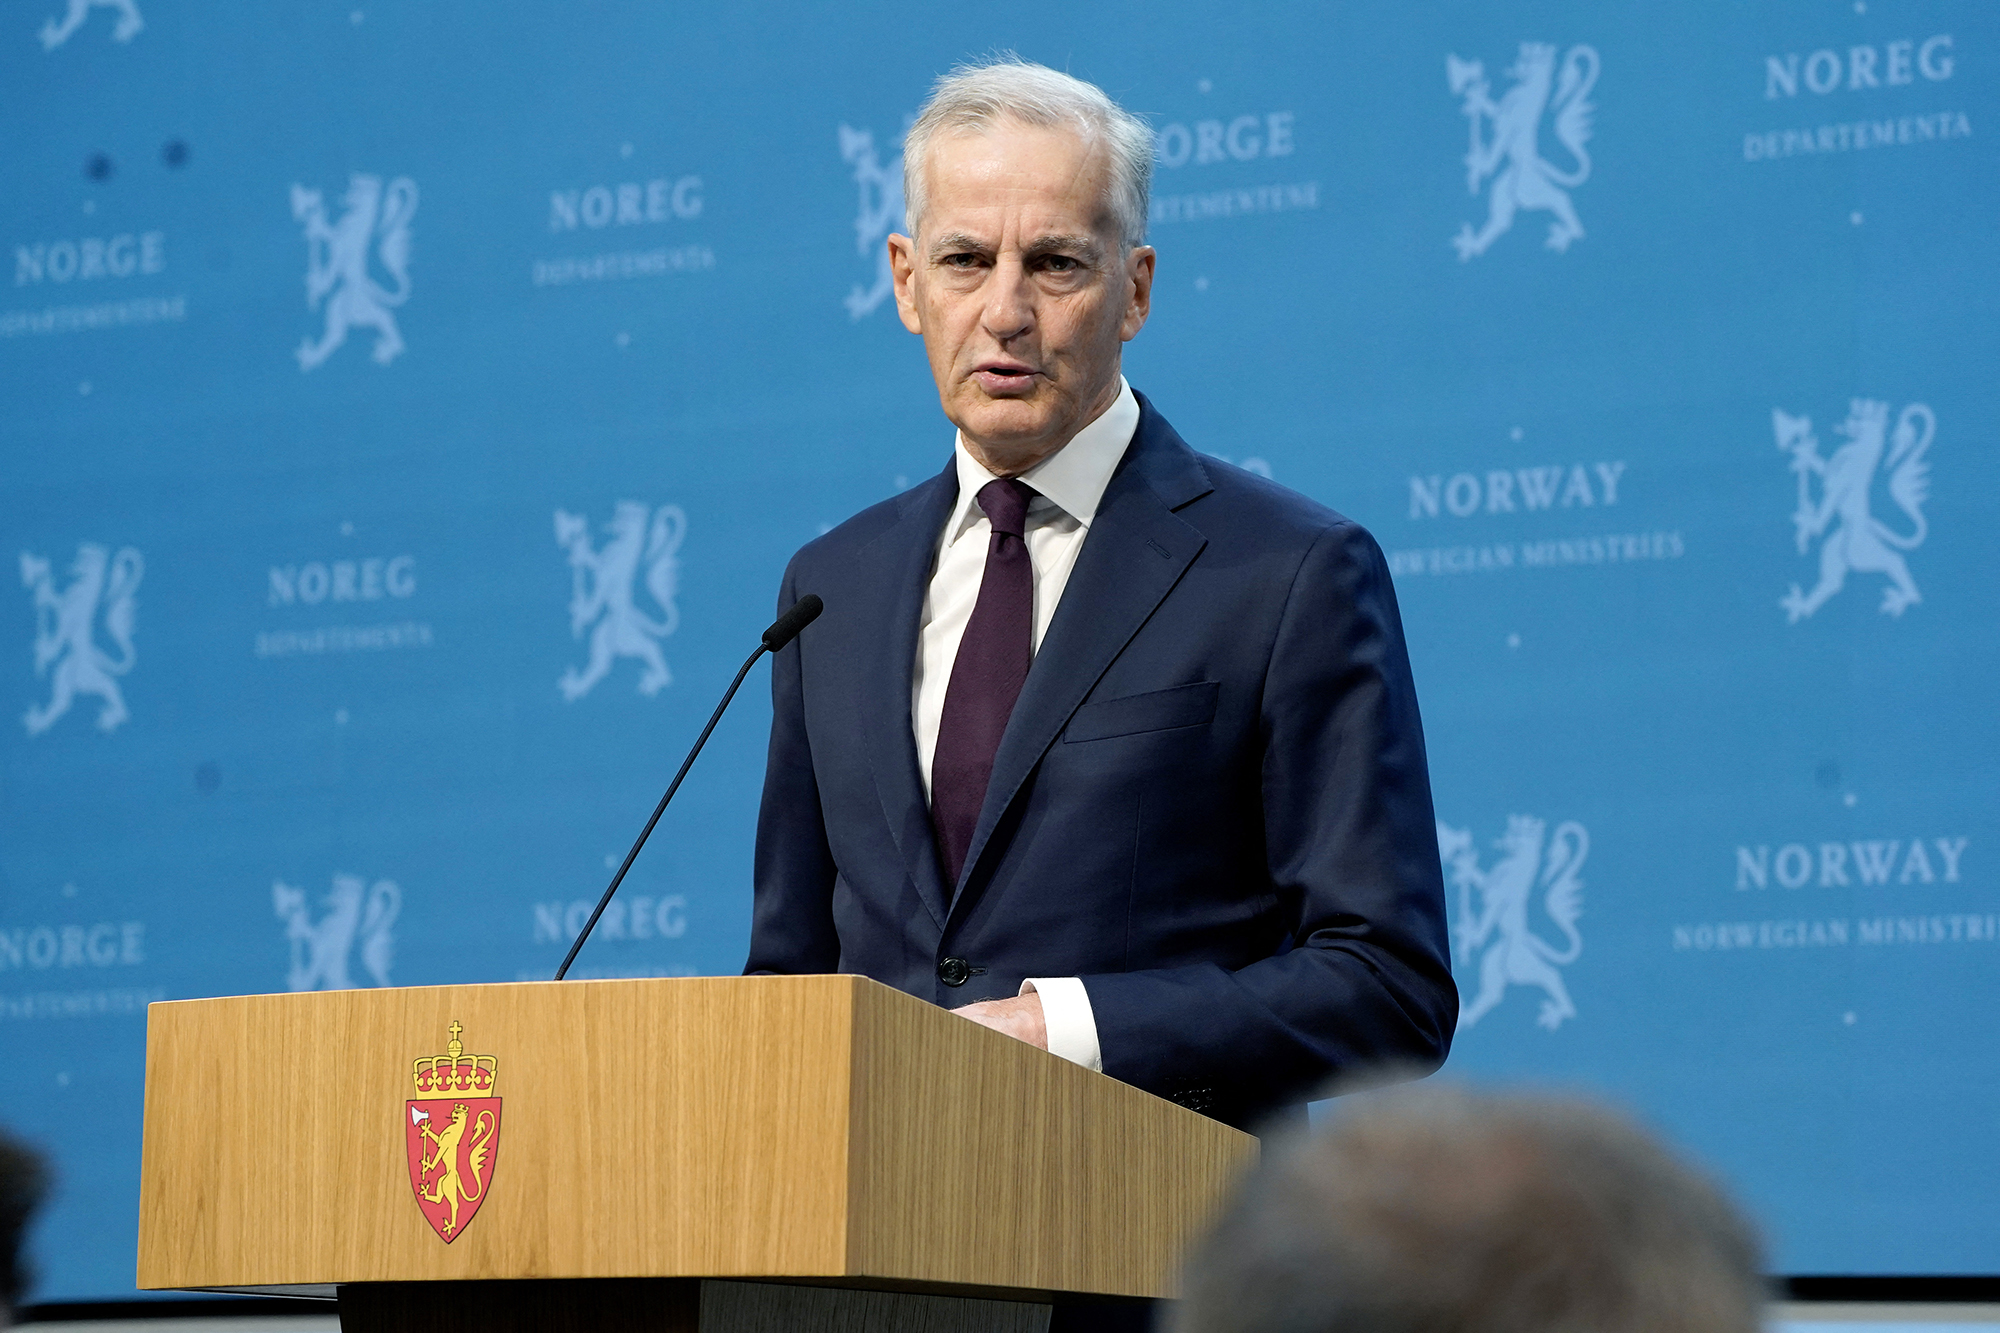 Norway's Prime Minister Jonas Gahr Store speaks during a press conference announcing that Norway recognises Palestine as an independent state from 28 May, in Oslo, Norway, on May 22.